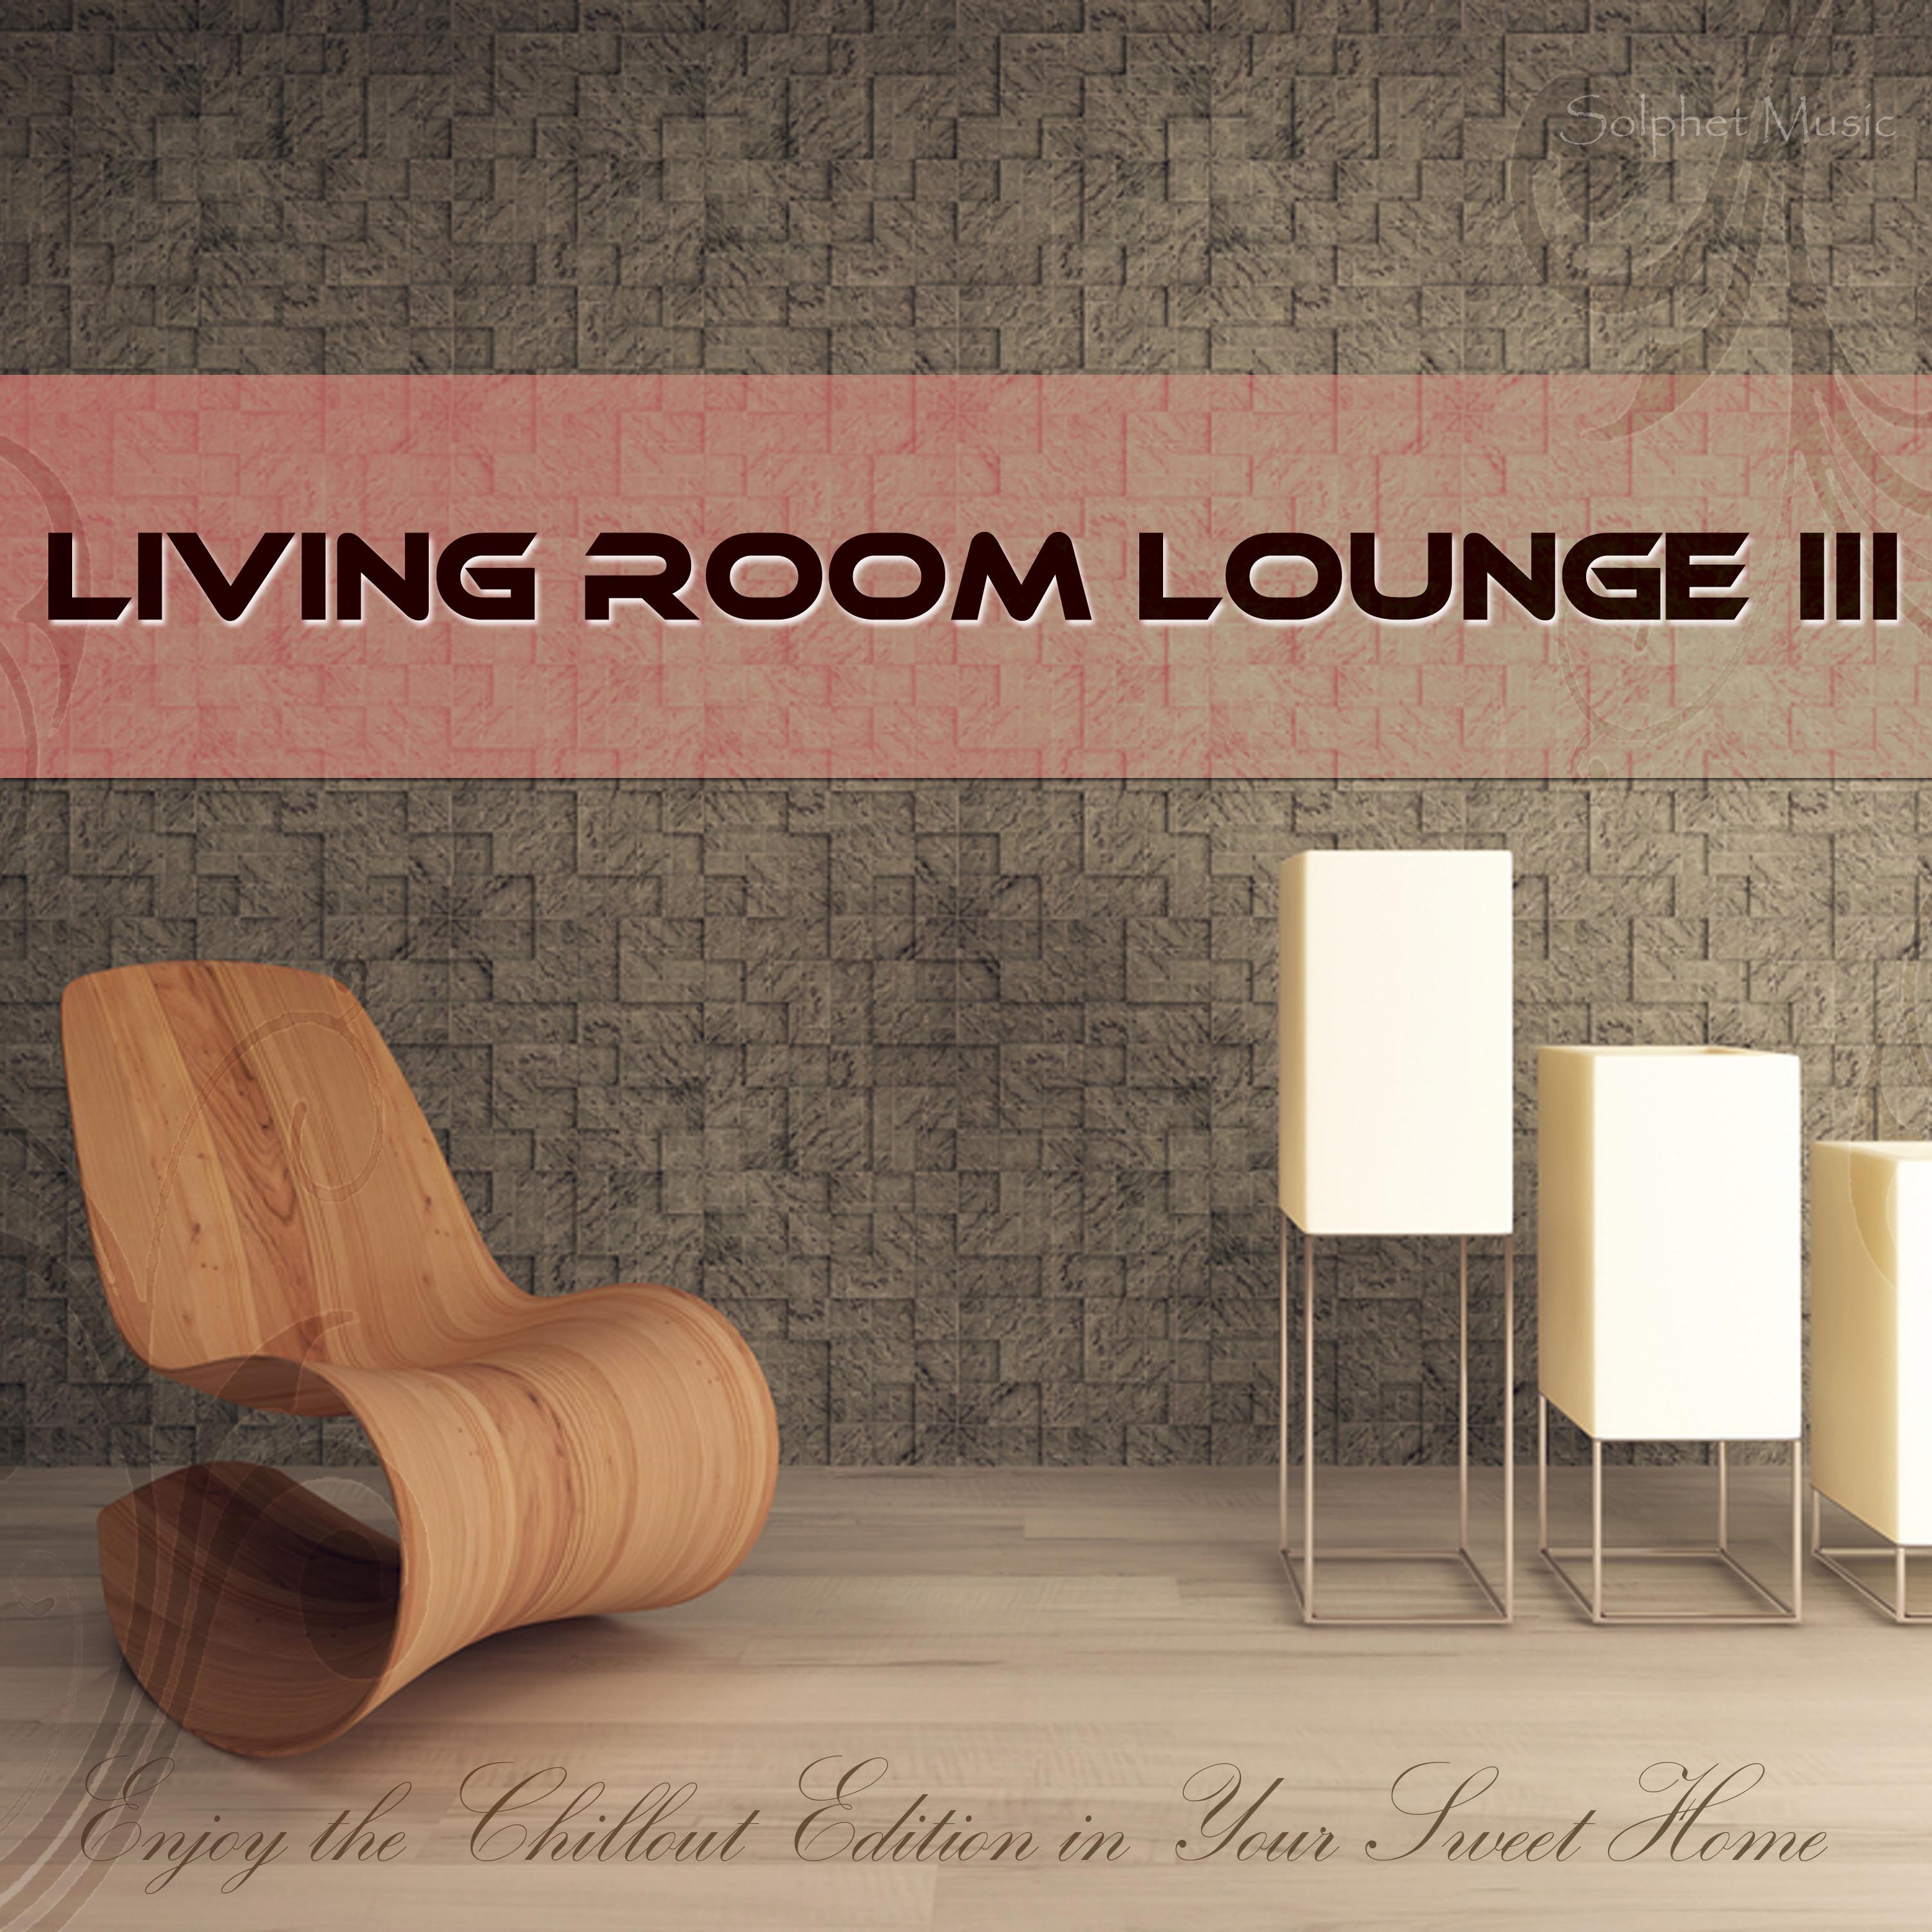 Living Room Lounge III - Enjoy the Chillout Edition in Your Sweet Home